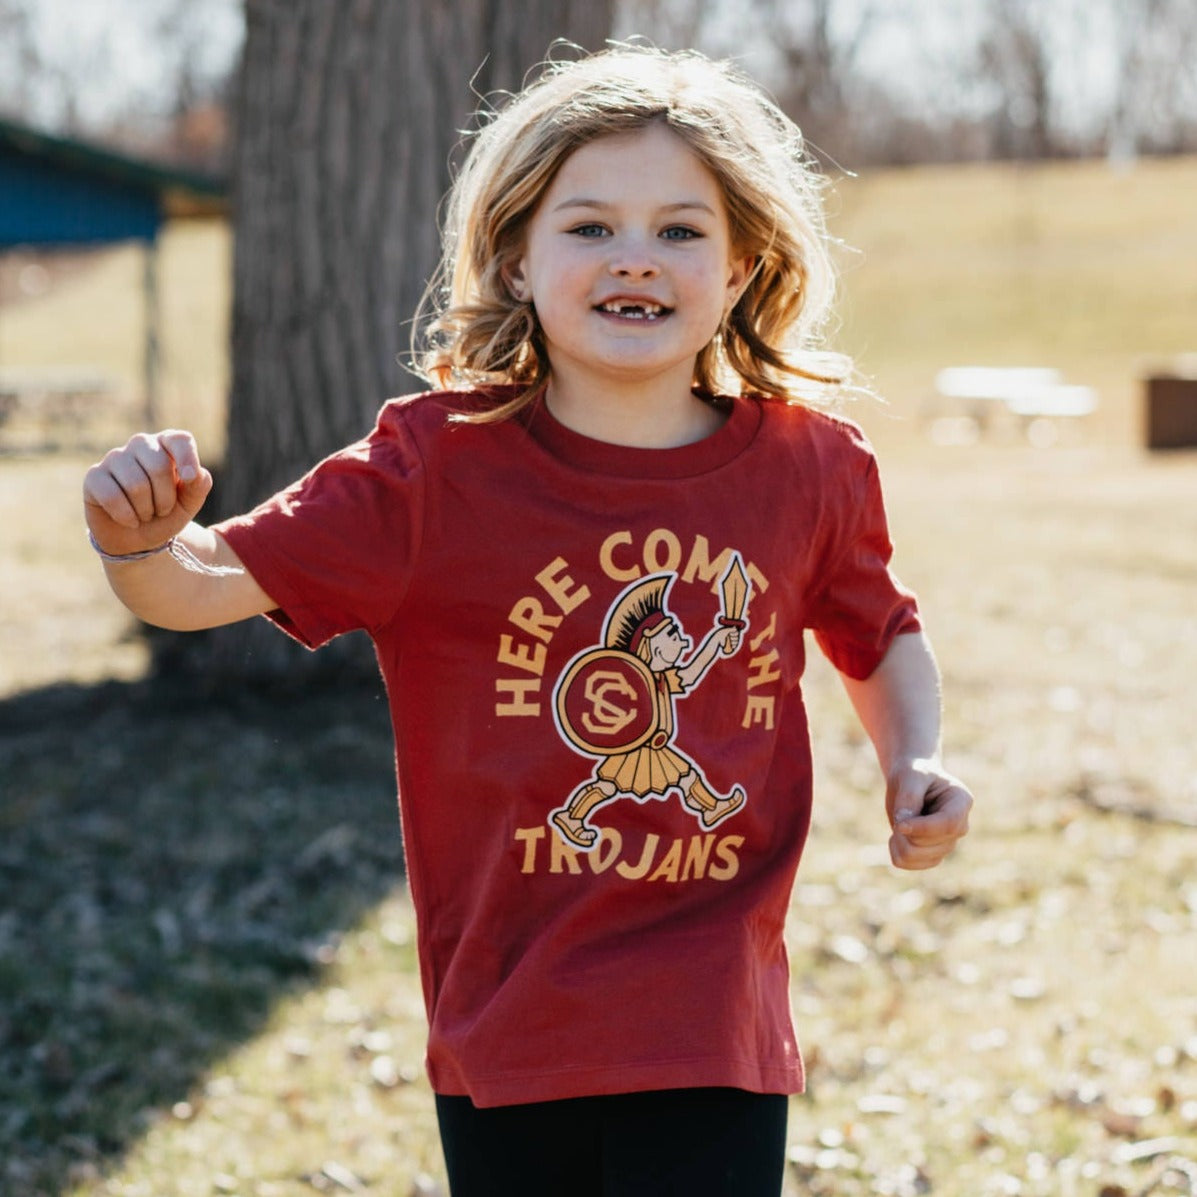 USC "Here Come the Trojans!" Youth Tee